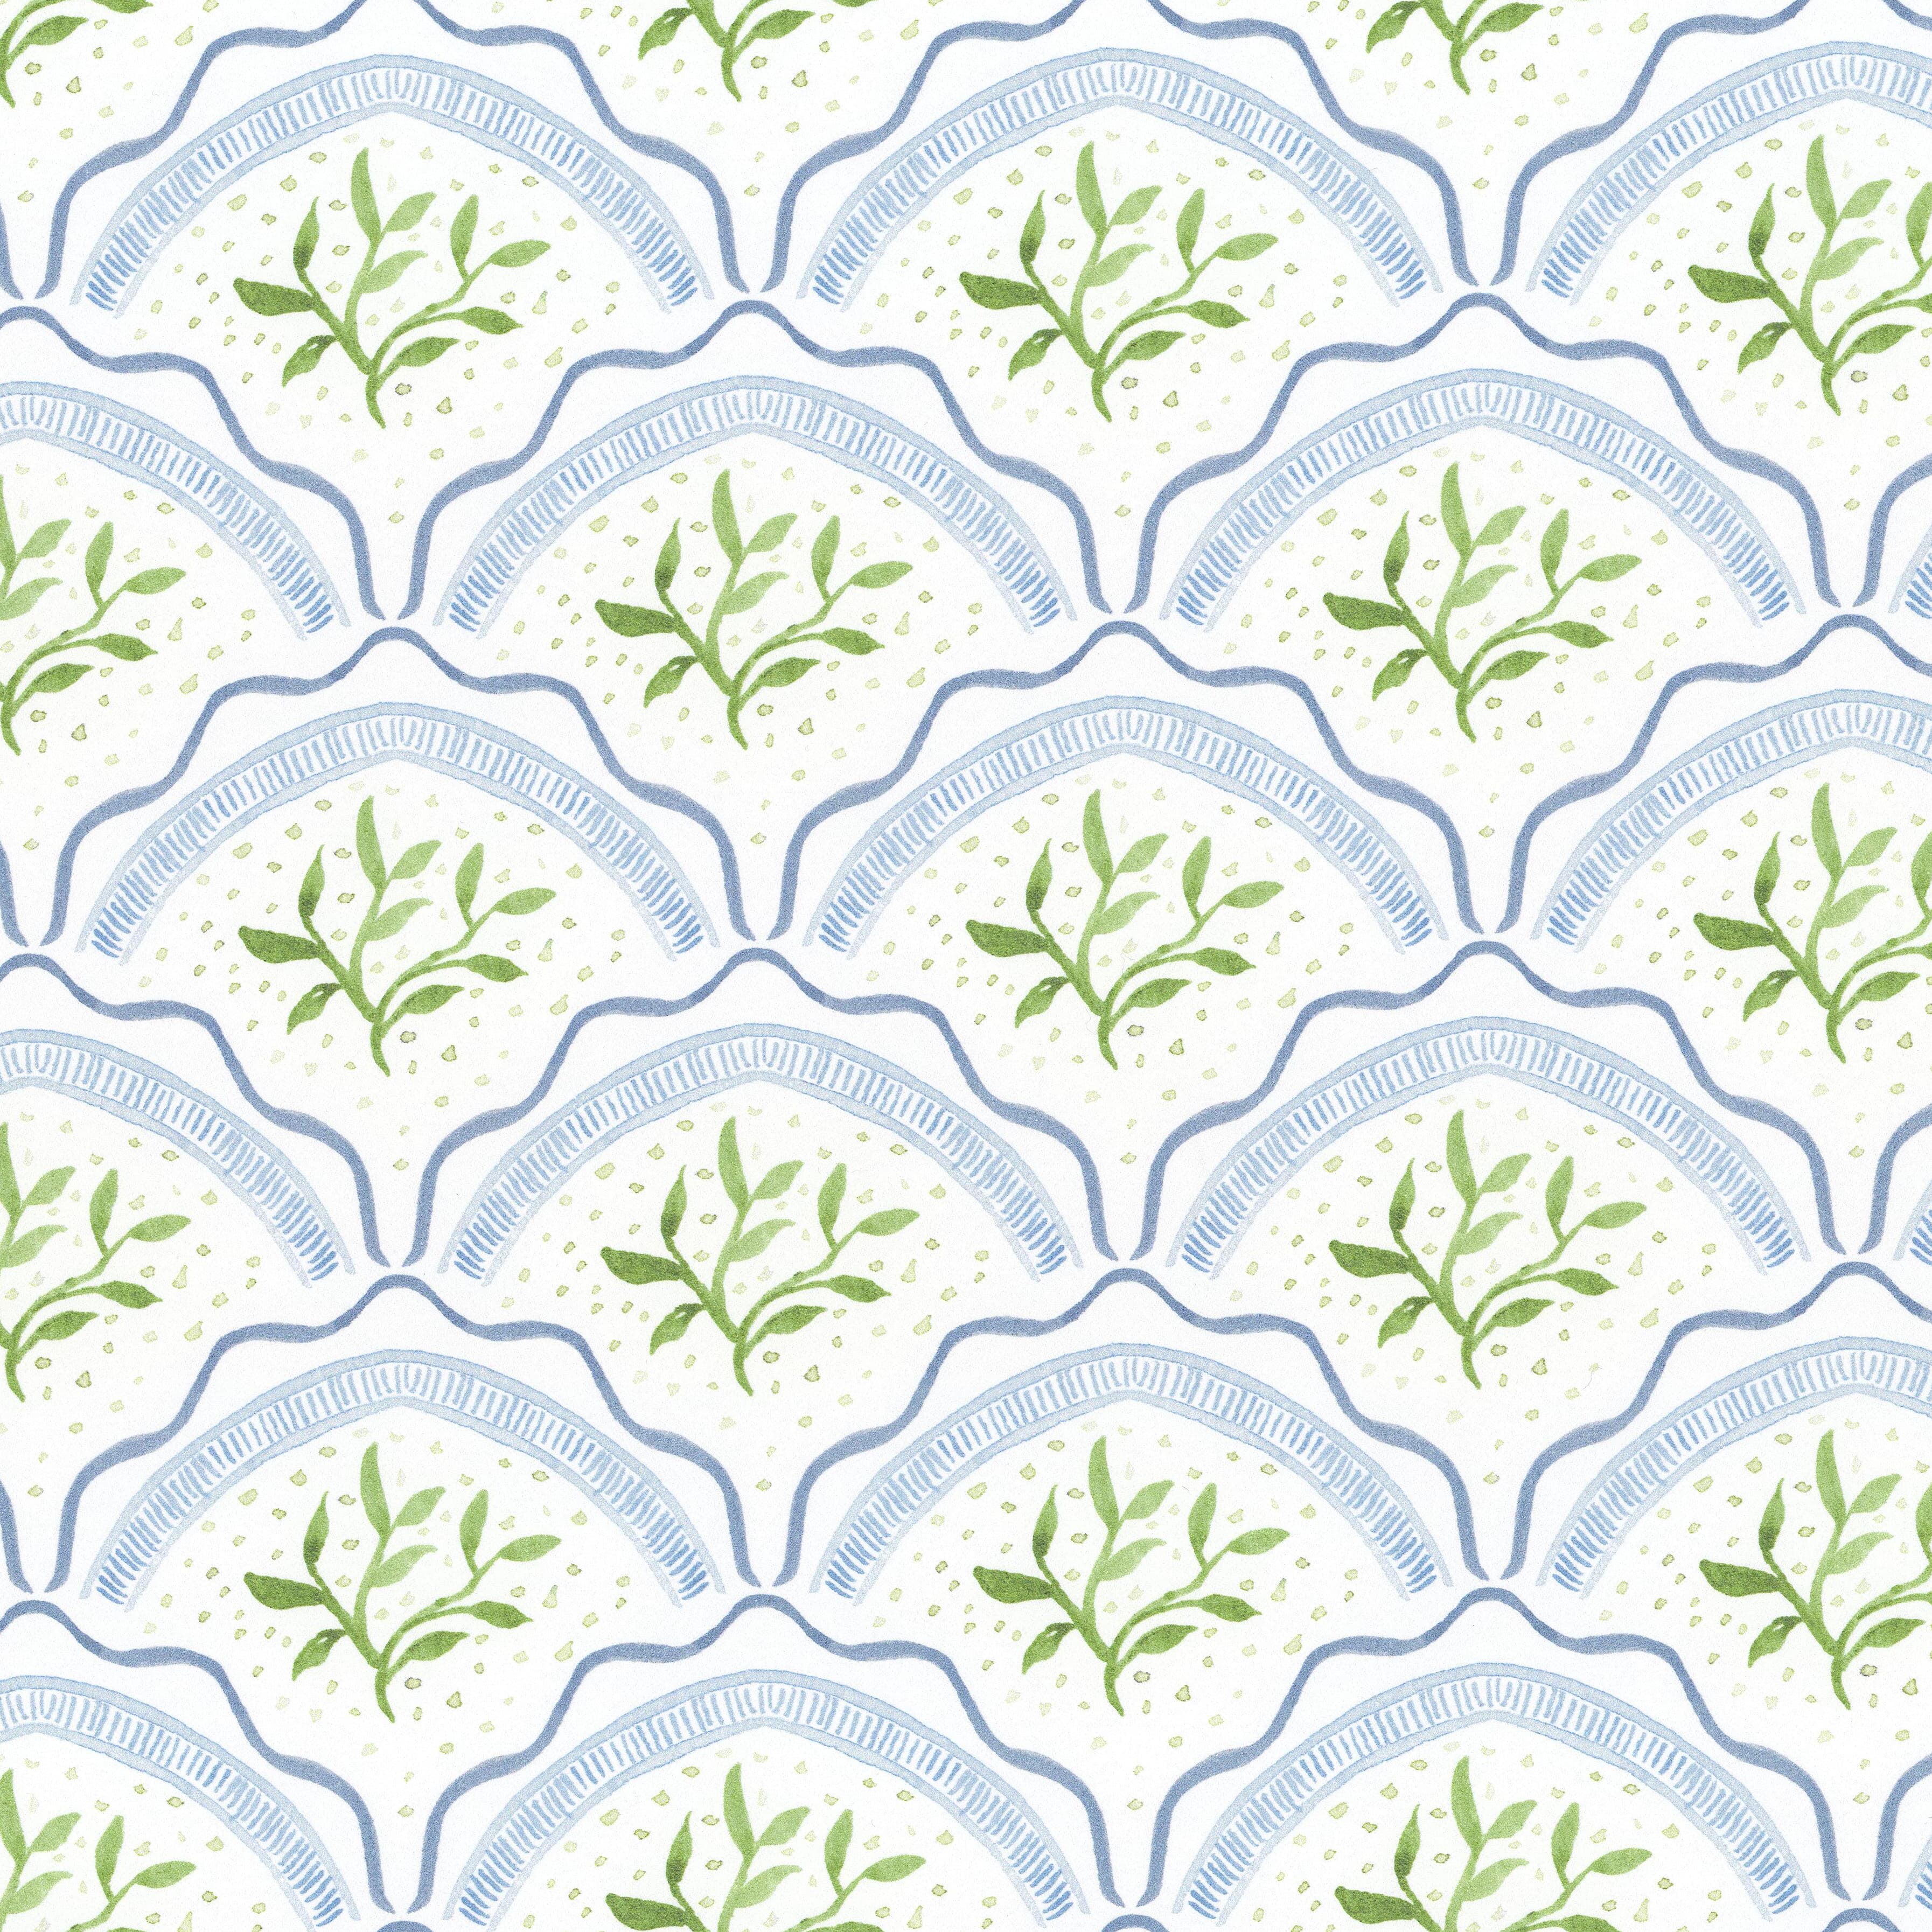 W7845 Vine Scallop 2 Spring by Stout Fabric